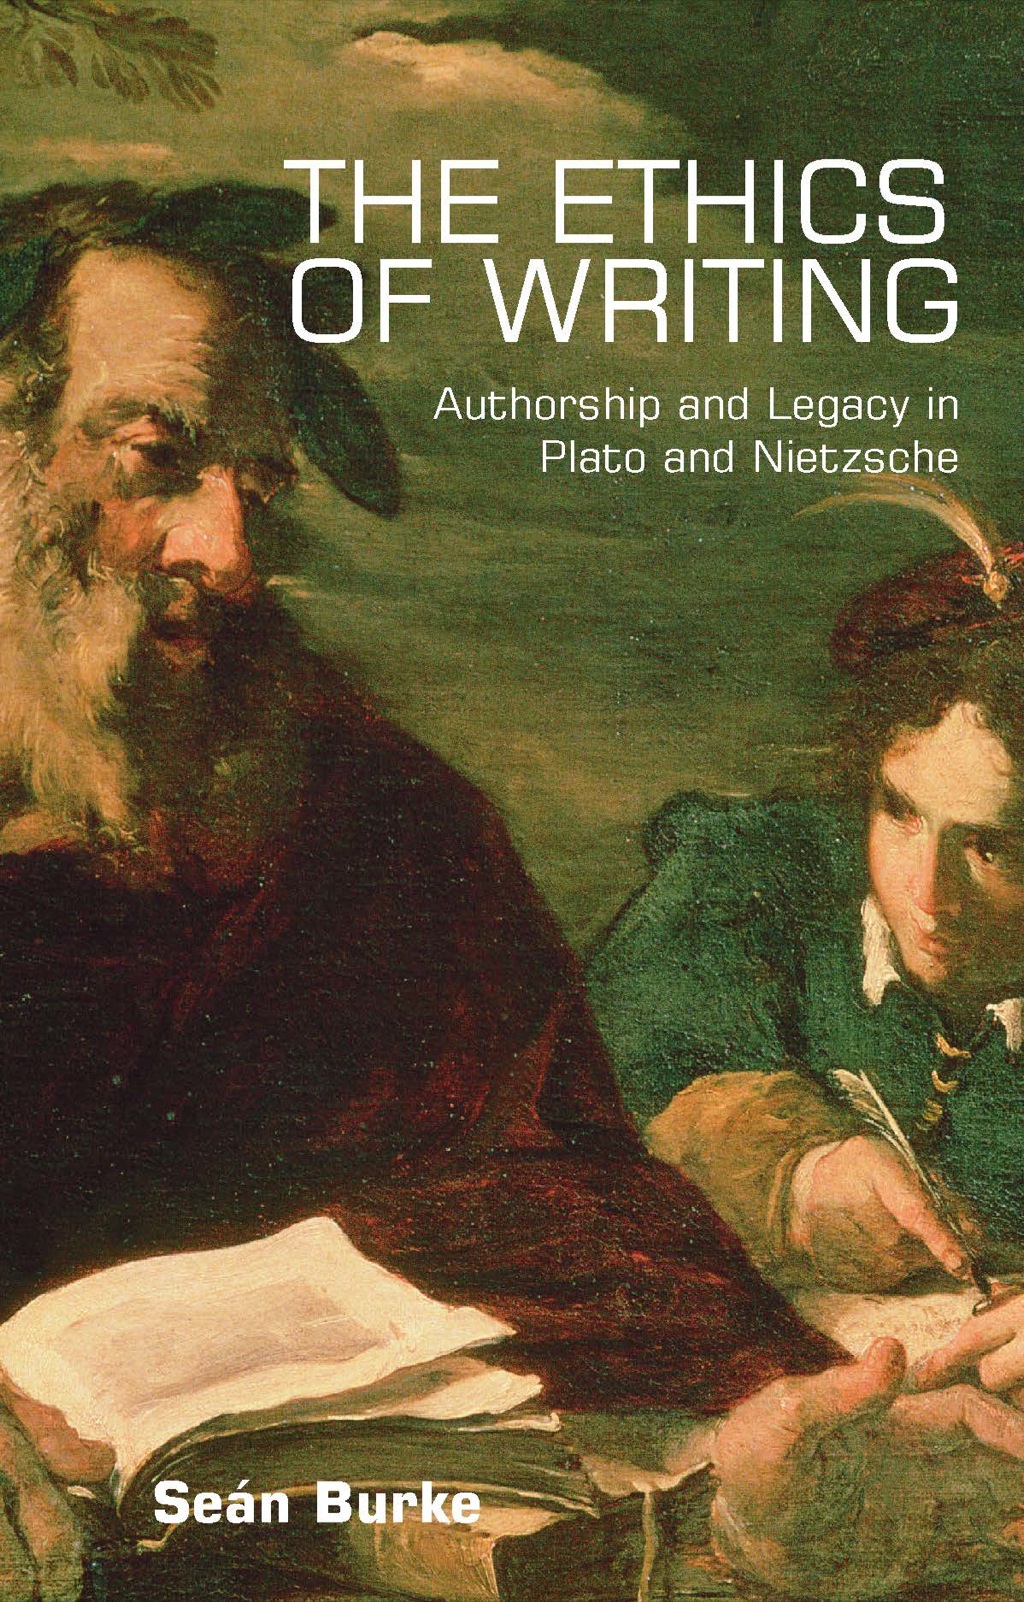 The Ethics of Writing: Authorship and Legacy in Plato and Nietzsche (eBook) - SeÃ¡n Burke,